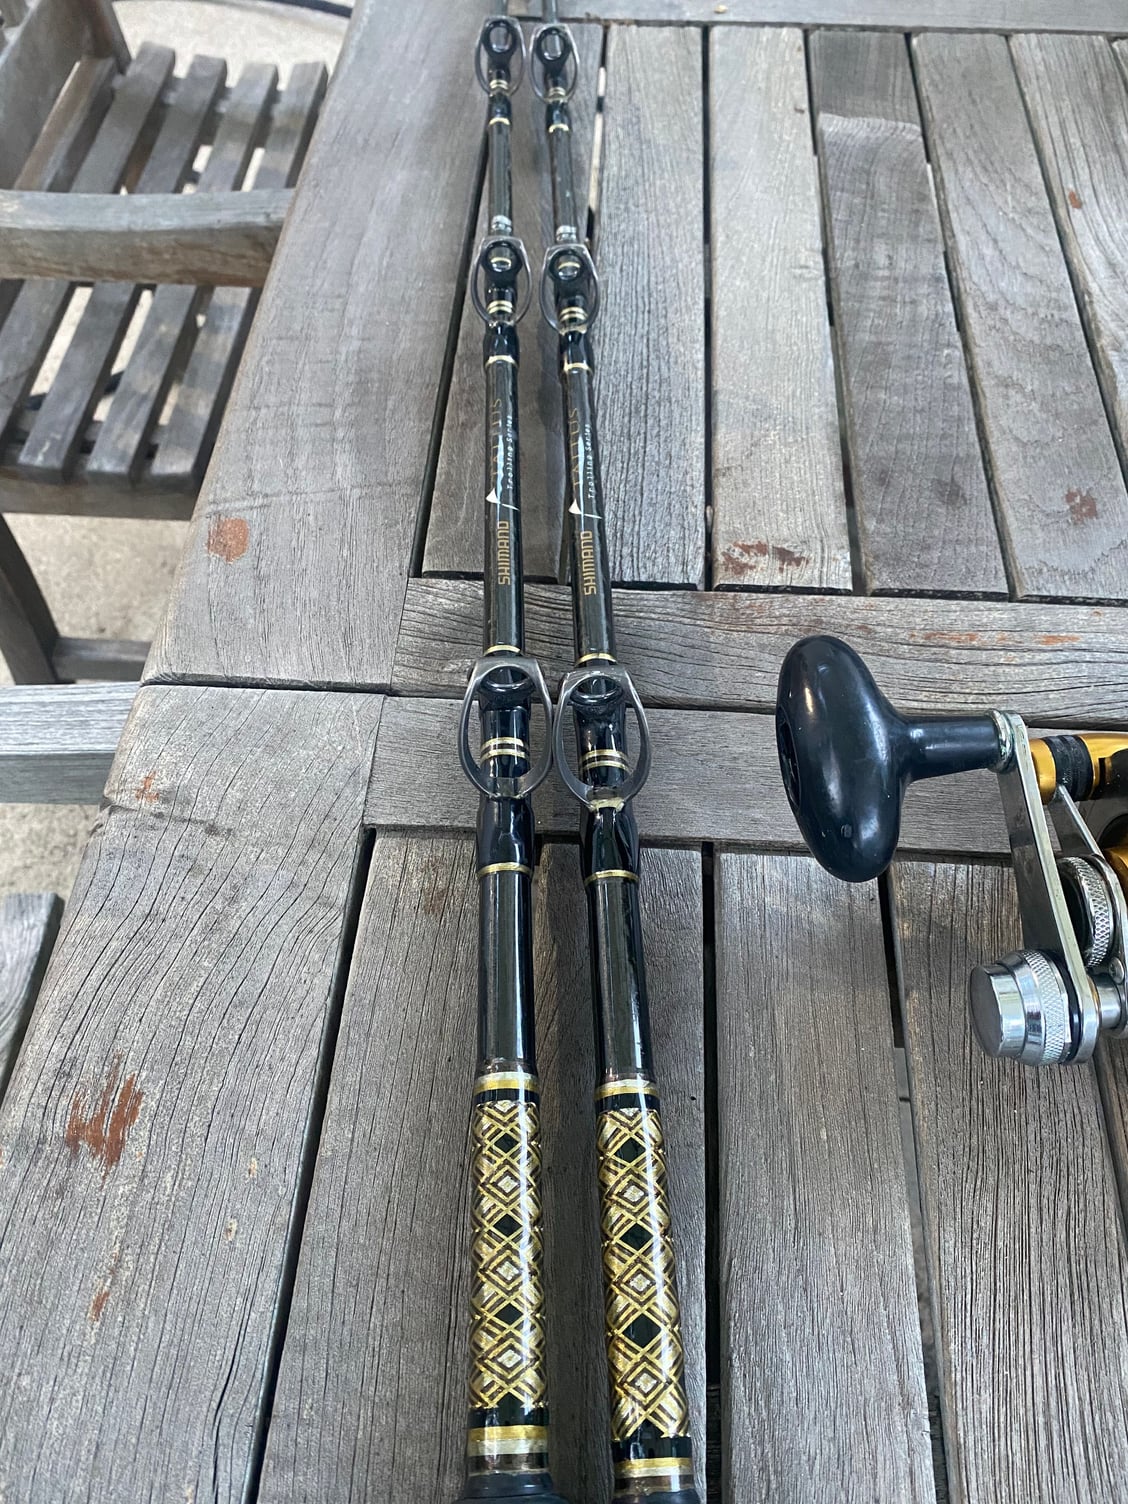 Shimano tallus trolling rods x2 aftco butt - The Hull Truth